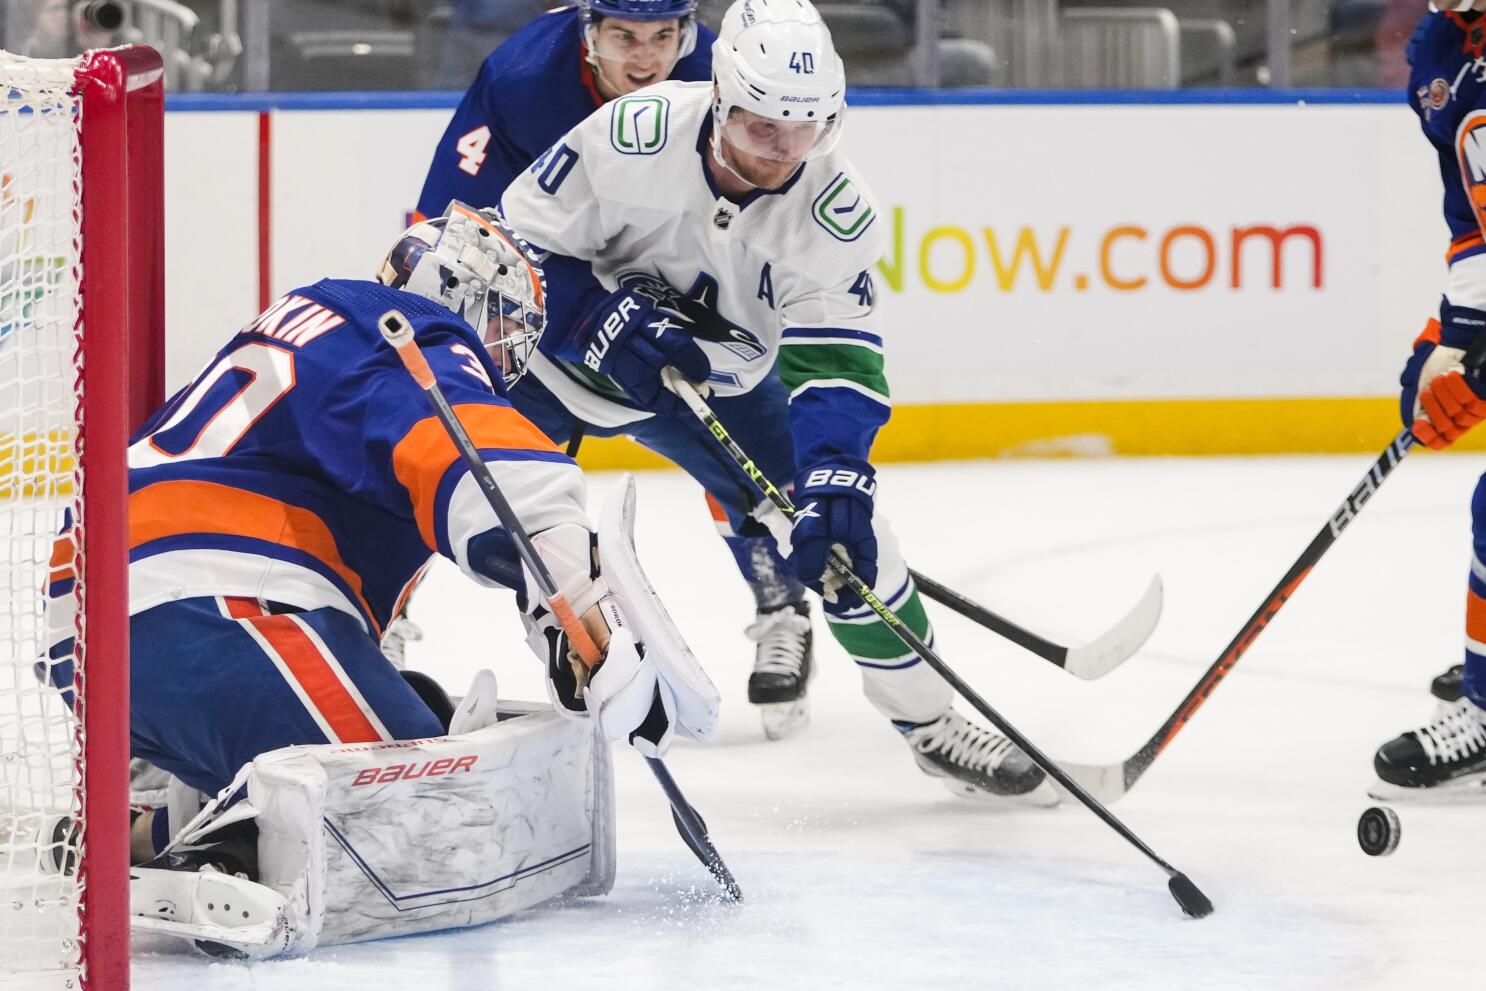 Palmieri, Barzal score in win for Isles in Horvat's 1st game